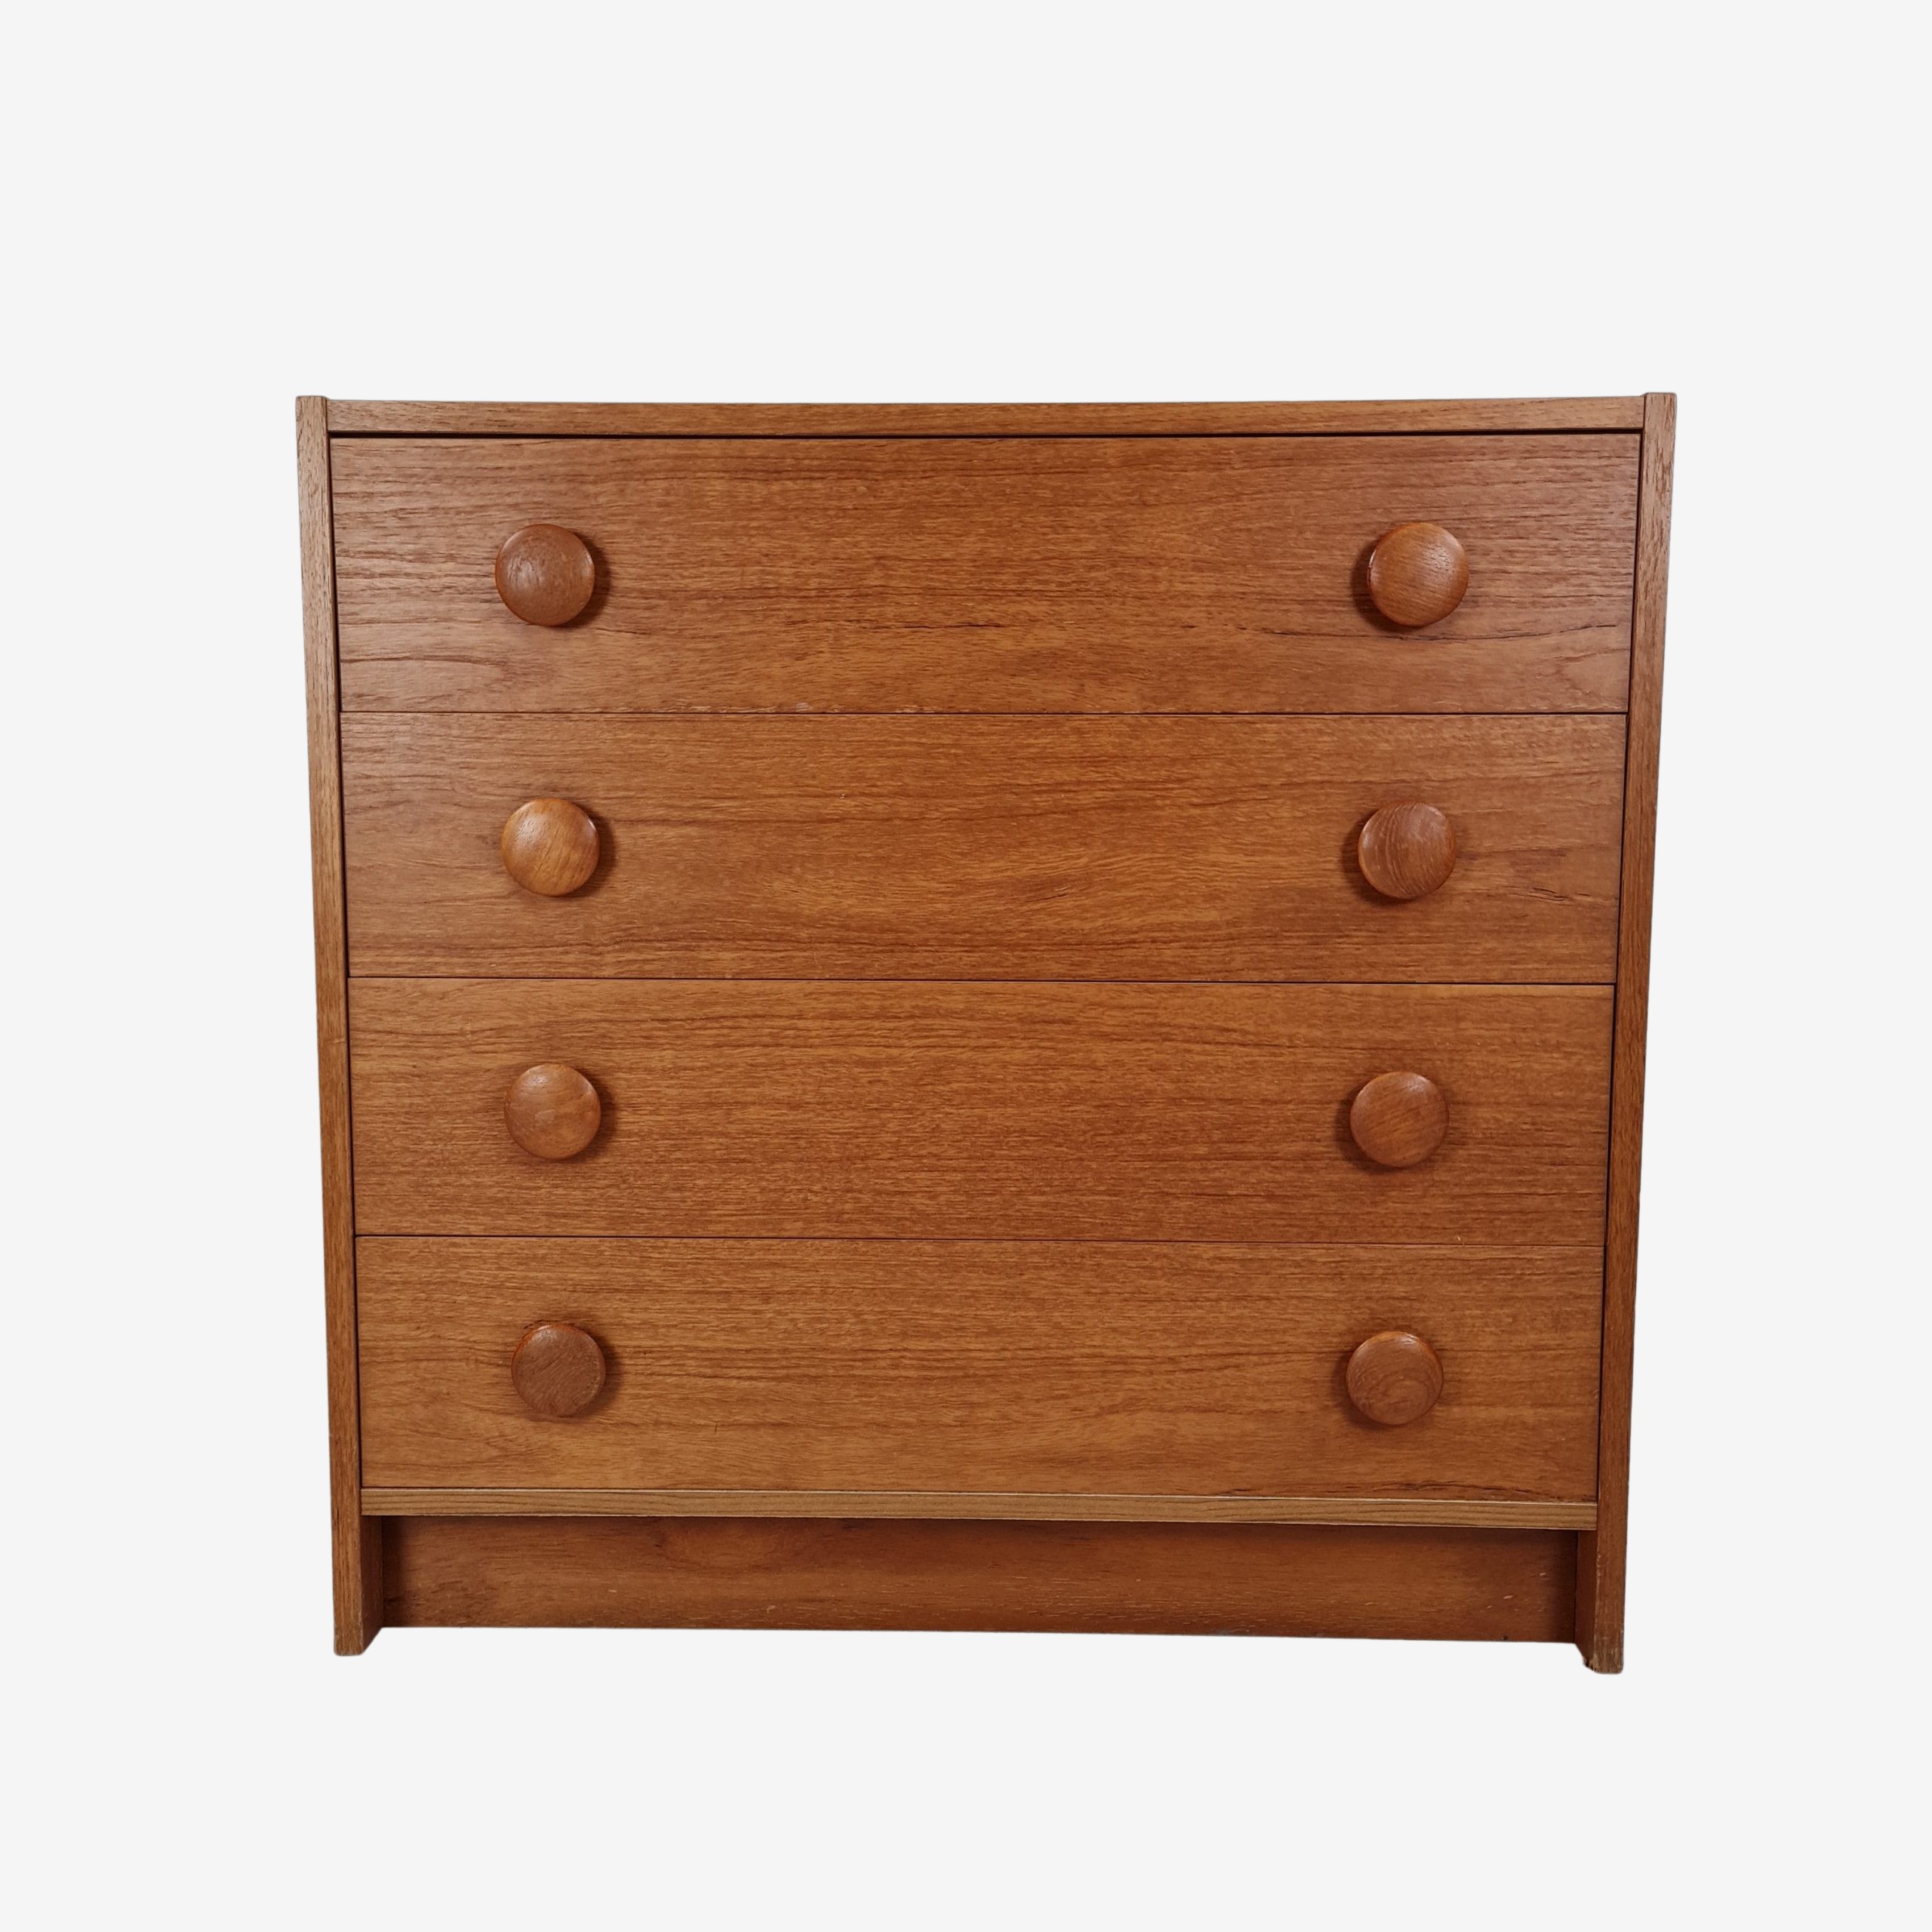 Chest of drawers with four drawers | Danish design | Light teak